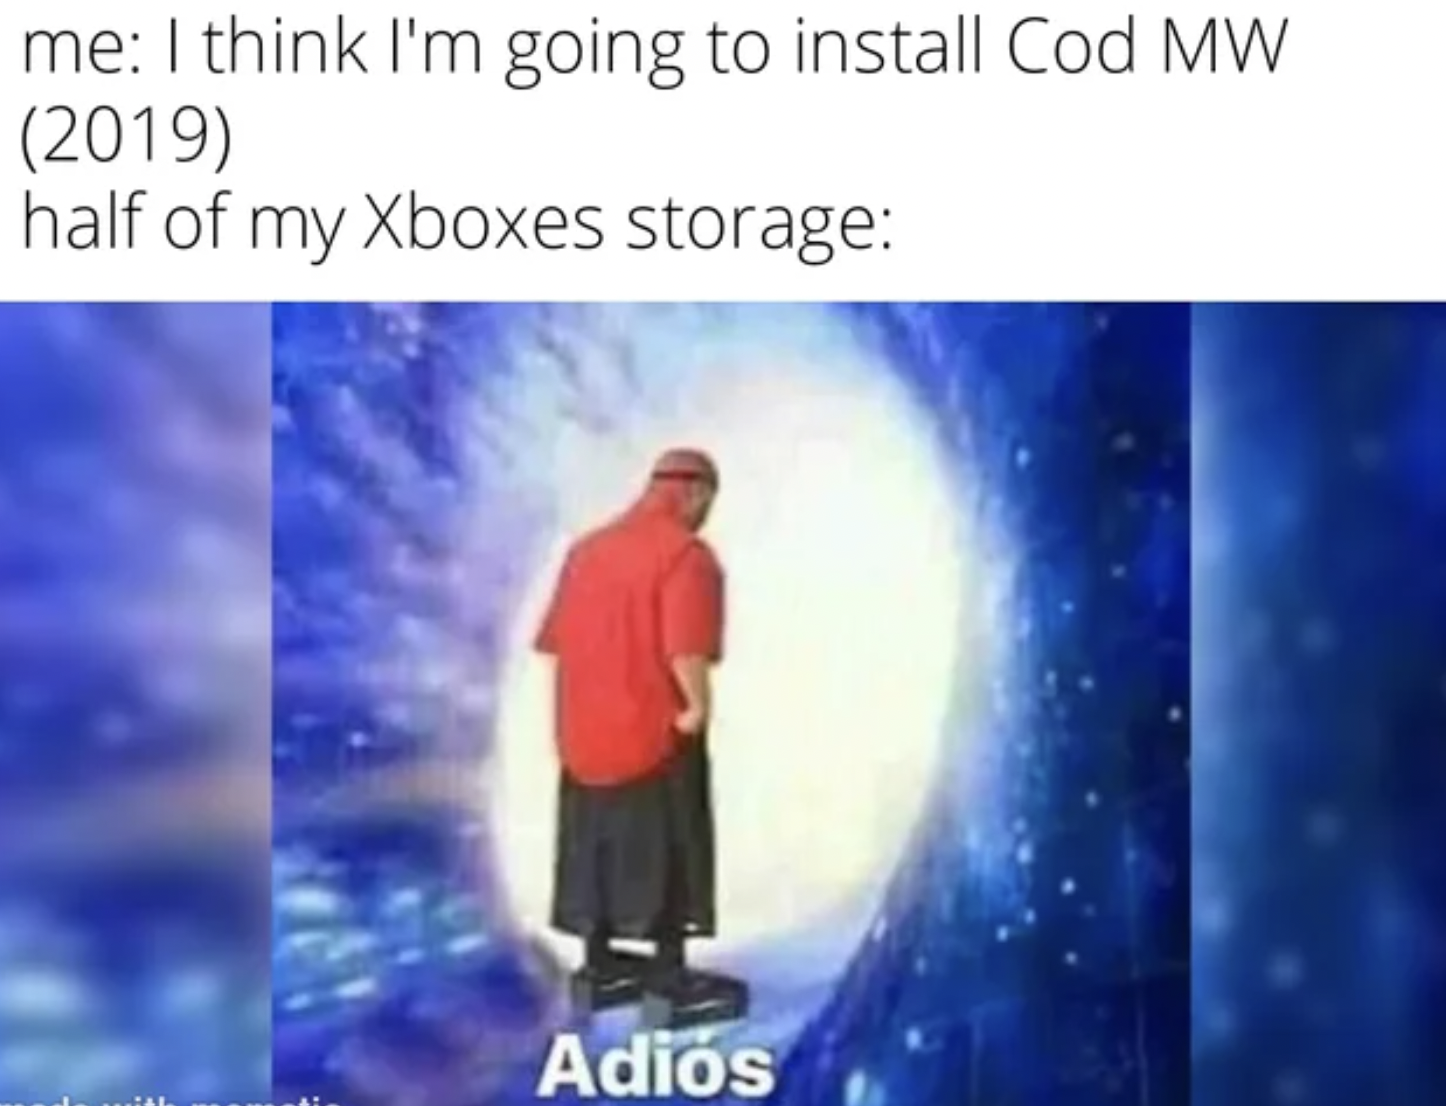 Call of Duty Memes - adios meme - me I think I'm going to install Cod Mw 2019 half of my Xboxes storage Adios